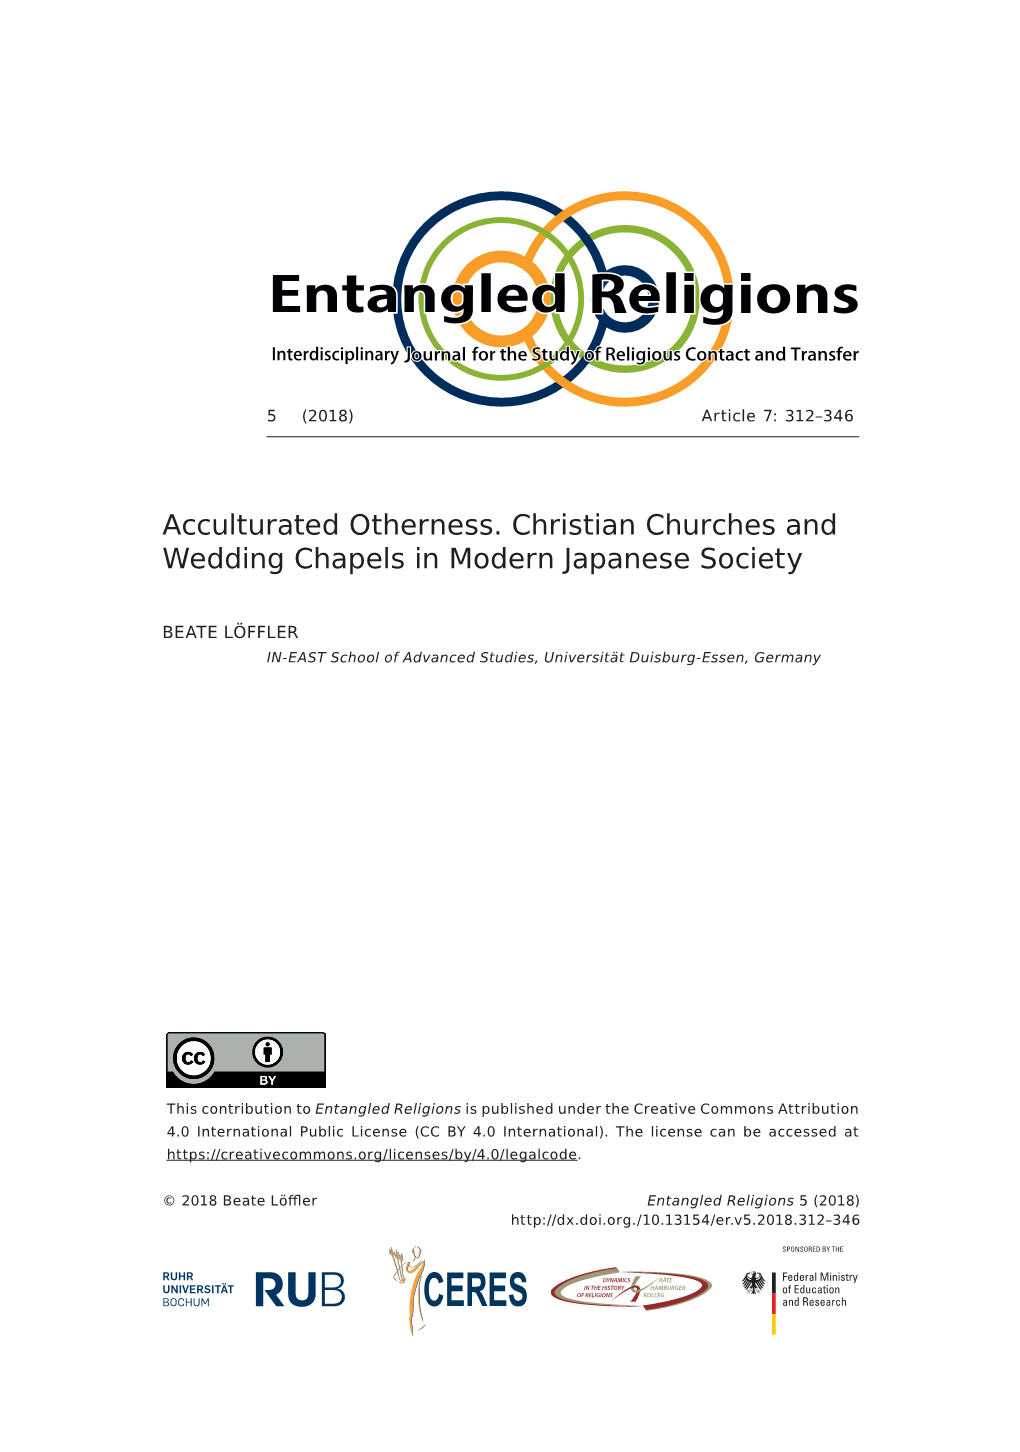 Acculturated Otherness. Christian Churches and Wedding Chapels in Modern Japanese Society